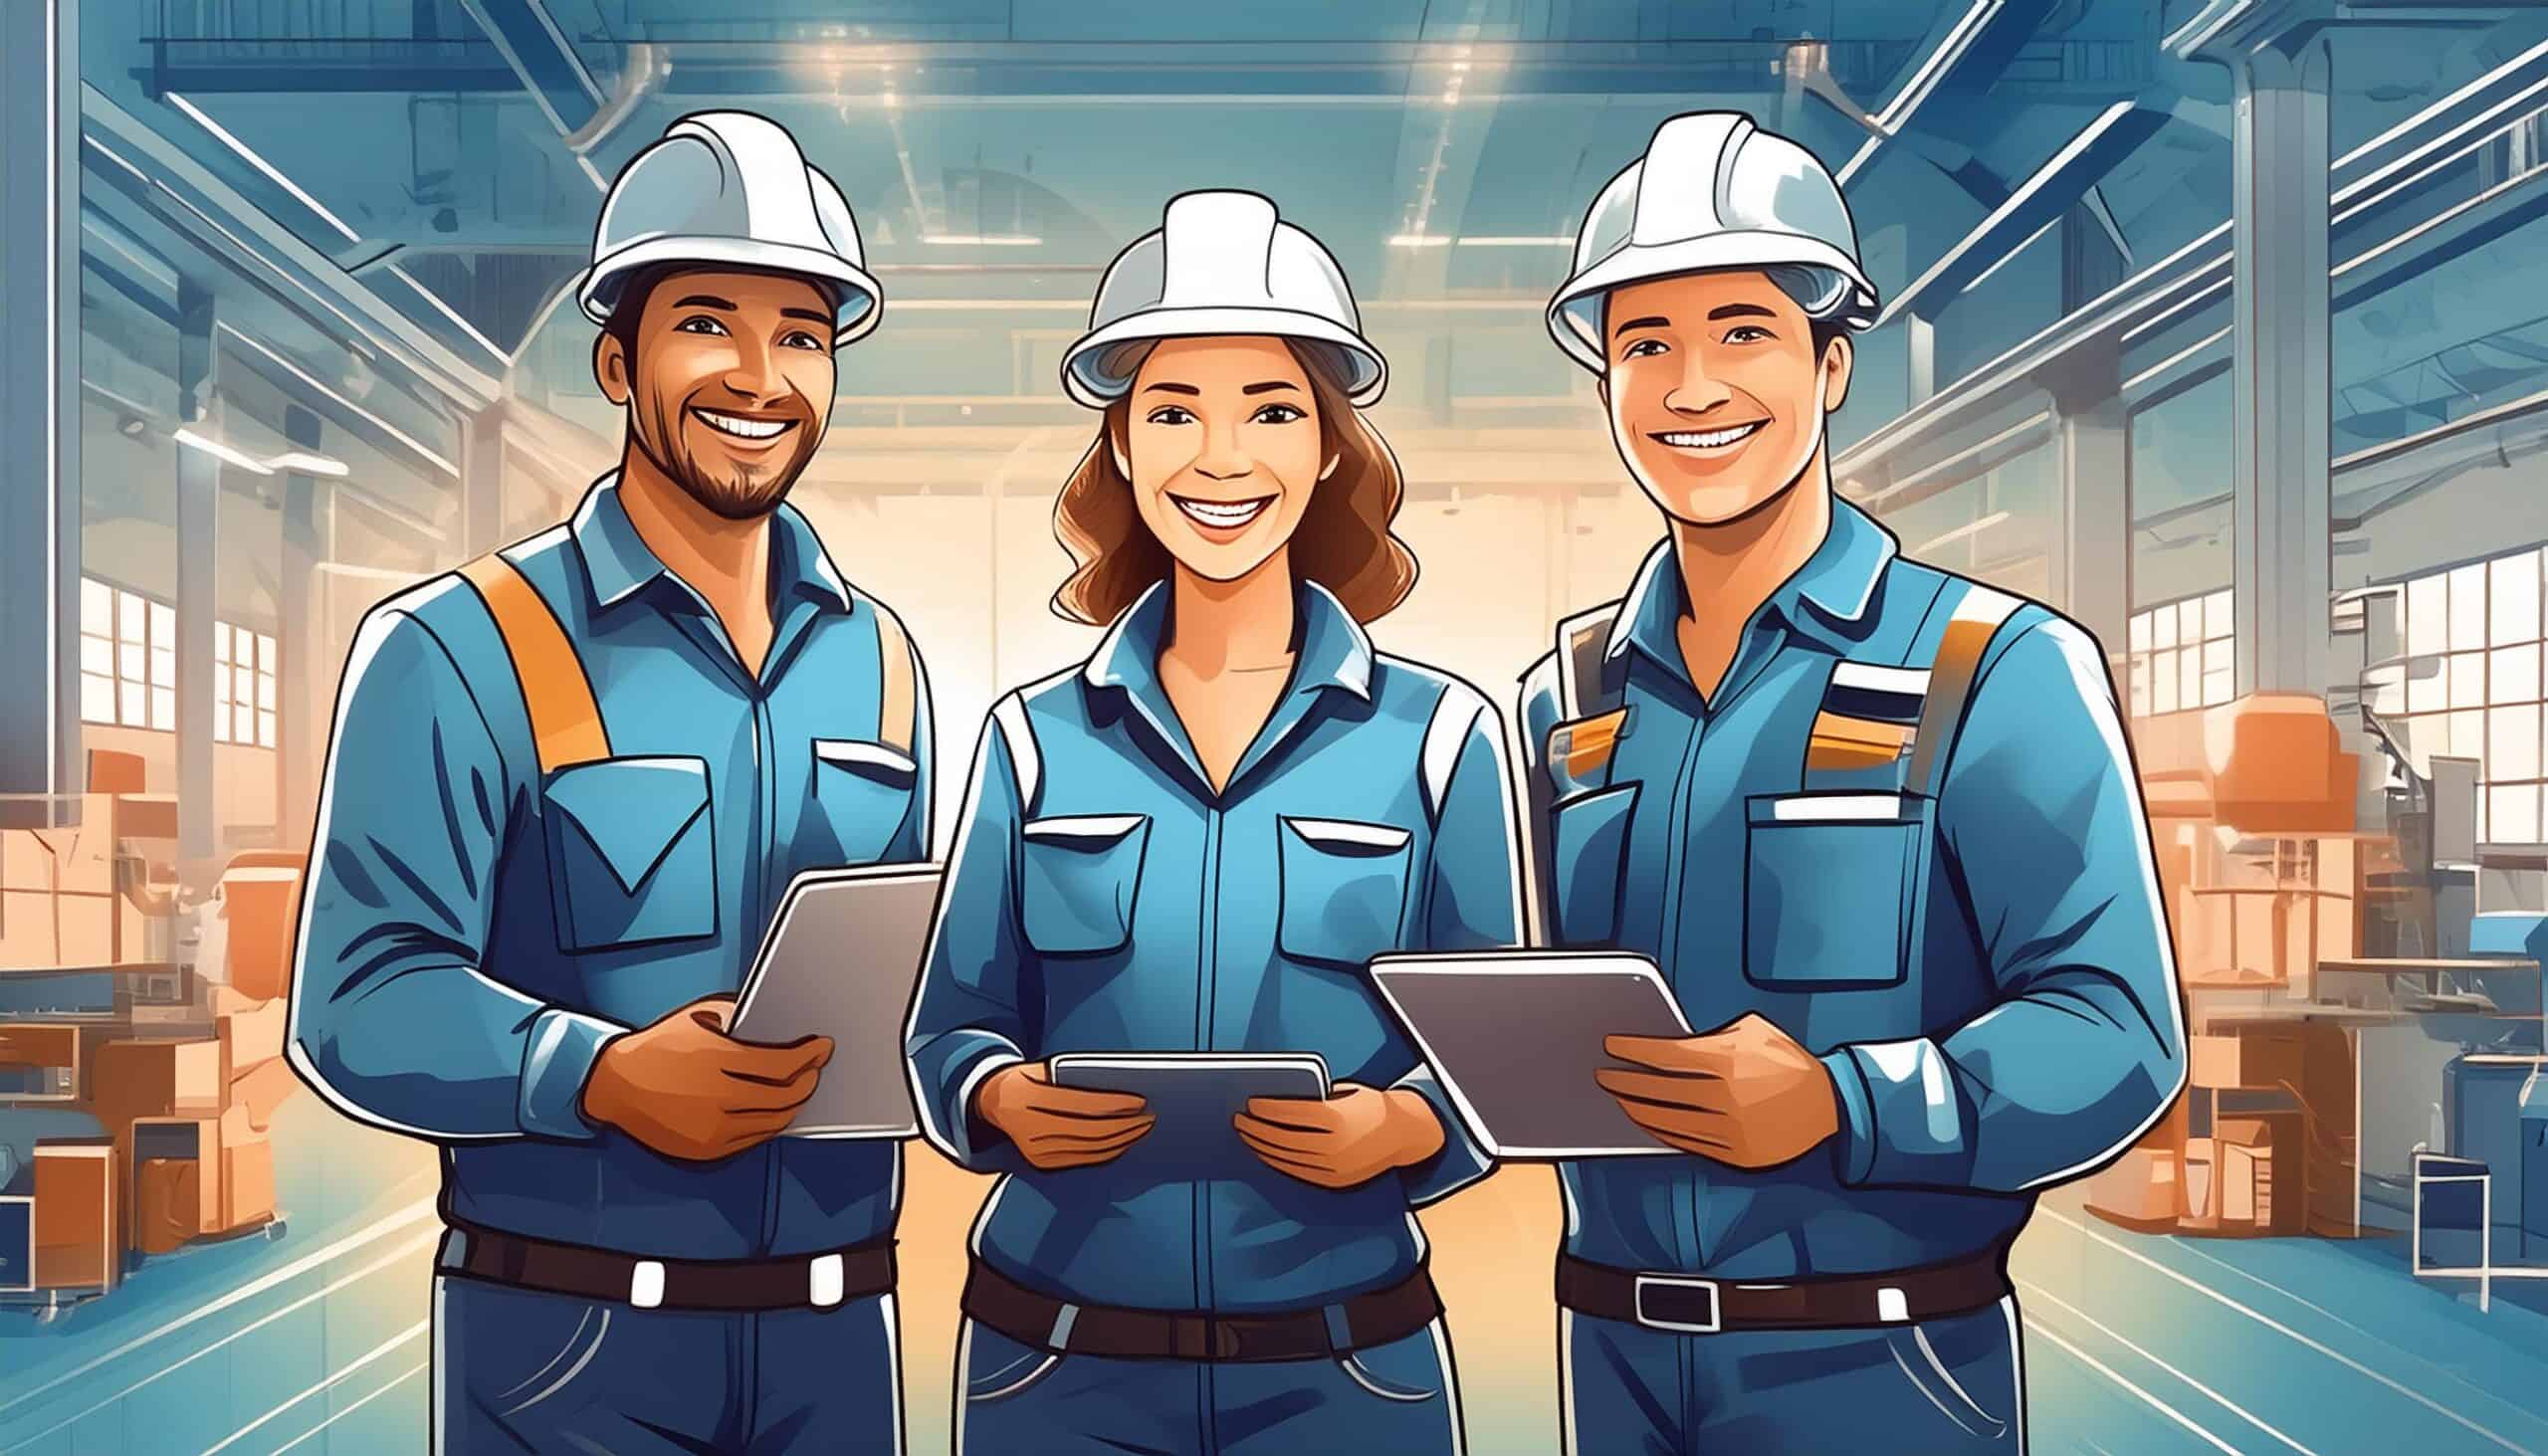 Three smiling engineers, two men and one woman, in blue uniforms and safety helmets, using tablets on the manufacturing floor. They are discussing manufacturing travellers for optimizing production efficiency